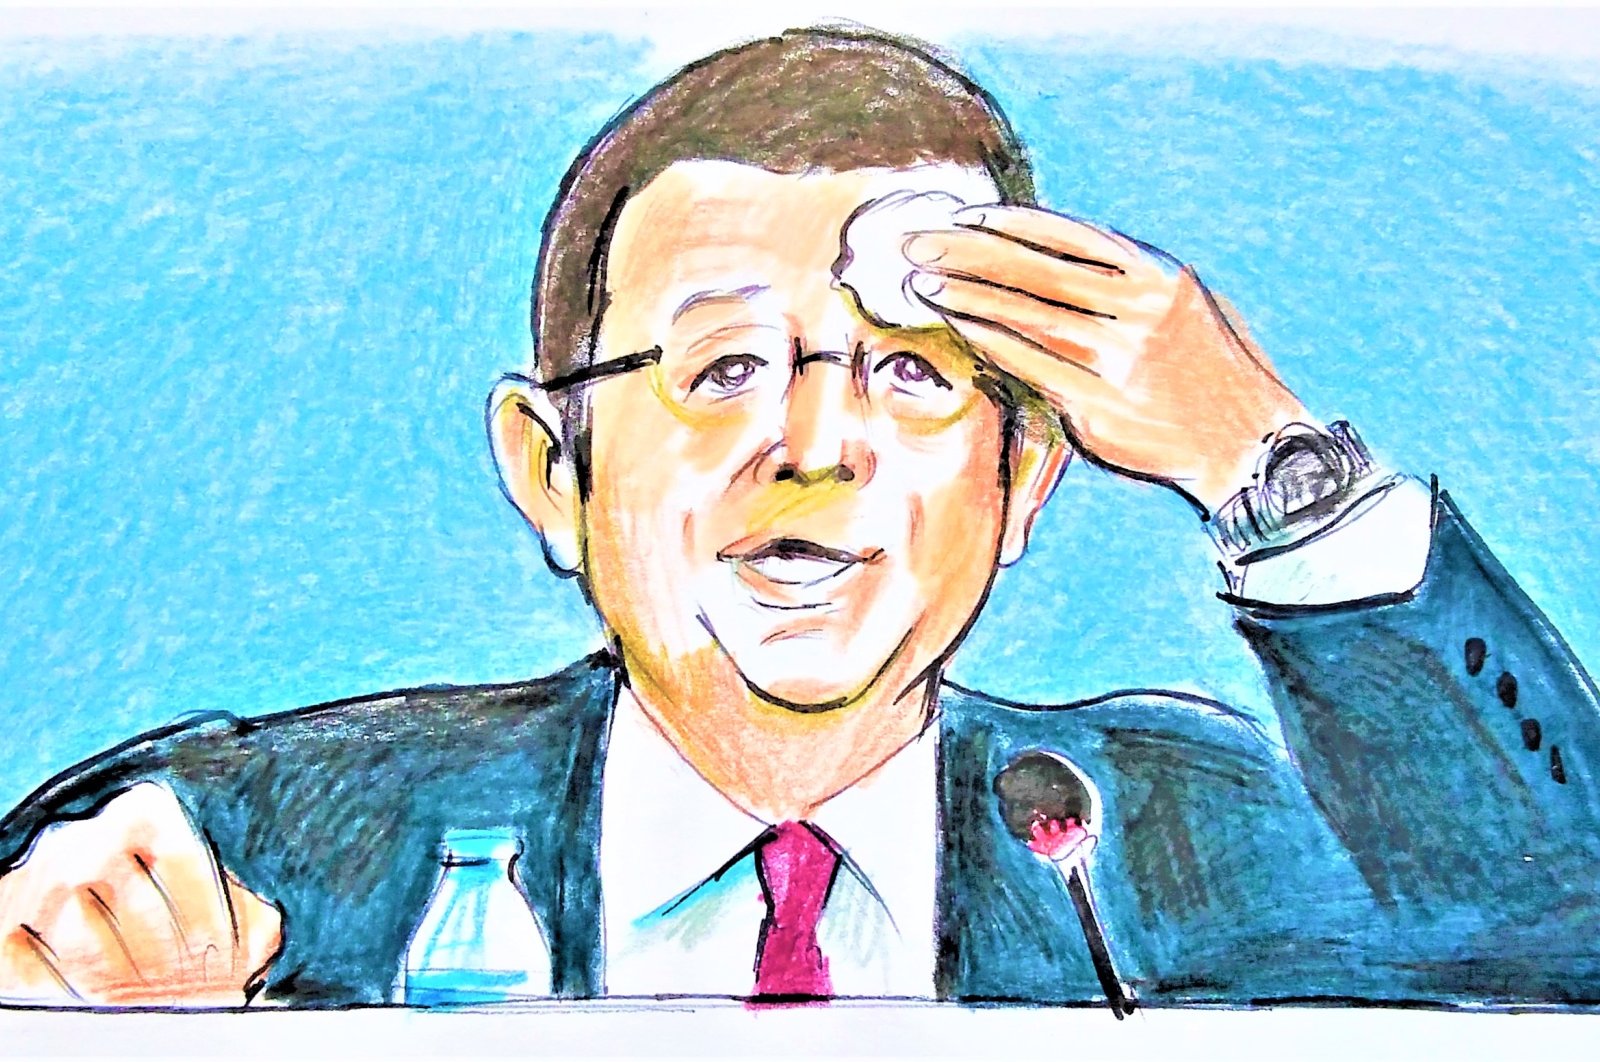 Istanbul Mayor Ekrem Imamoğlu has long been discreet about his ambitions for the country’s highest office. (Erhan Yalvaç Illustration)